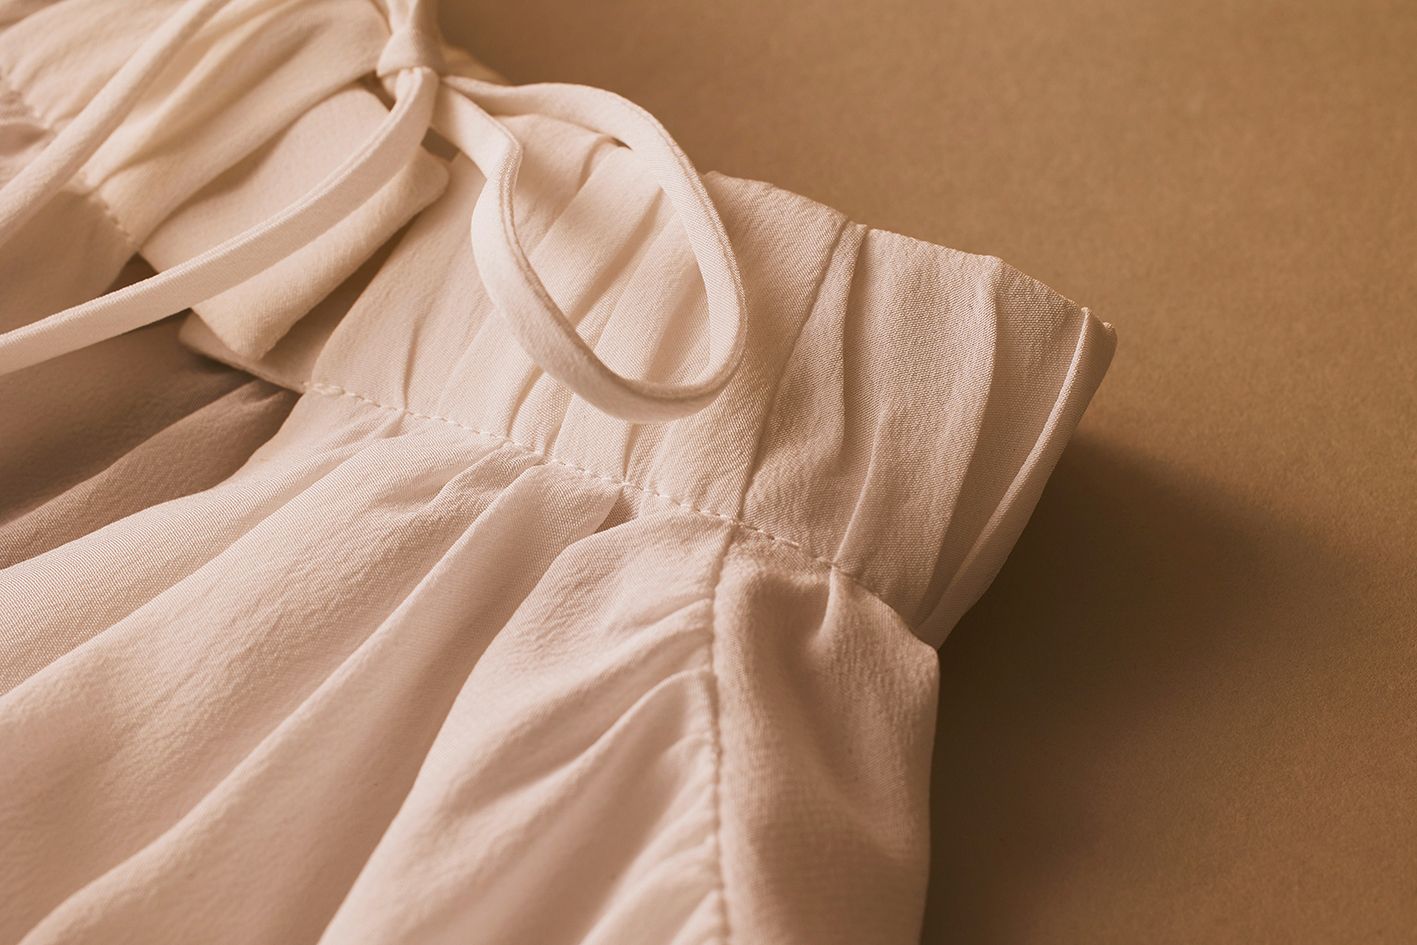 Scanlan Theodore silk blouse with close detailed view of silk fabrication and collar.